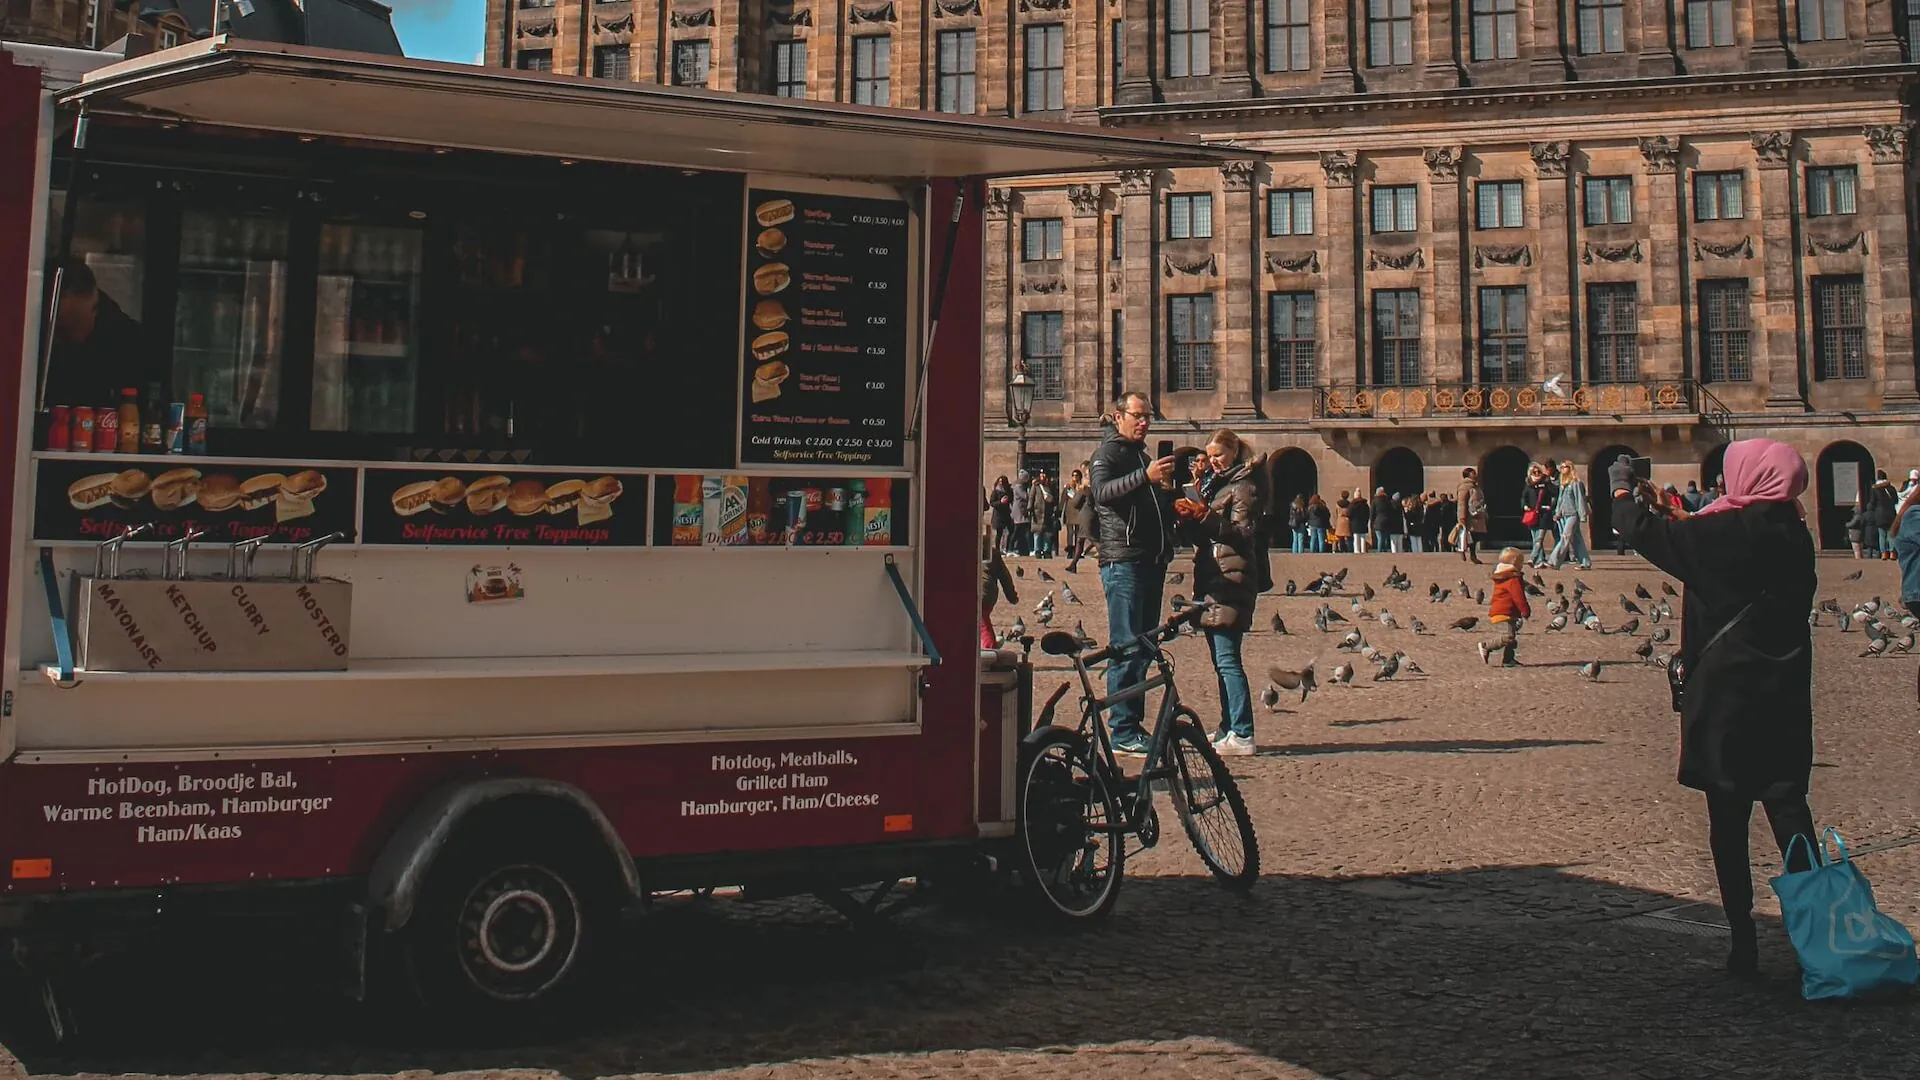 A street food stall in Amsterdam's Royal Palace Square